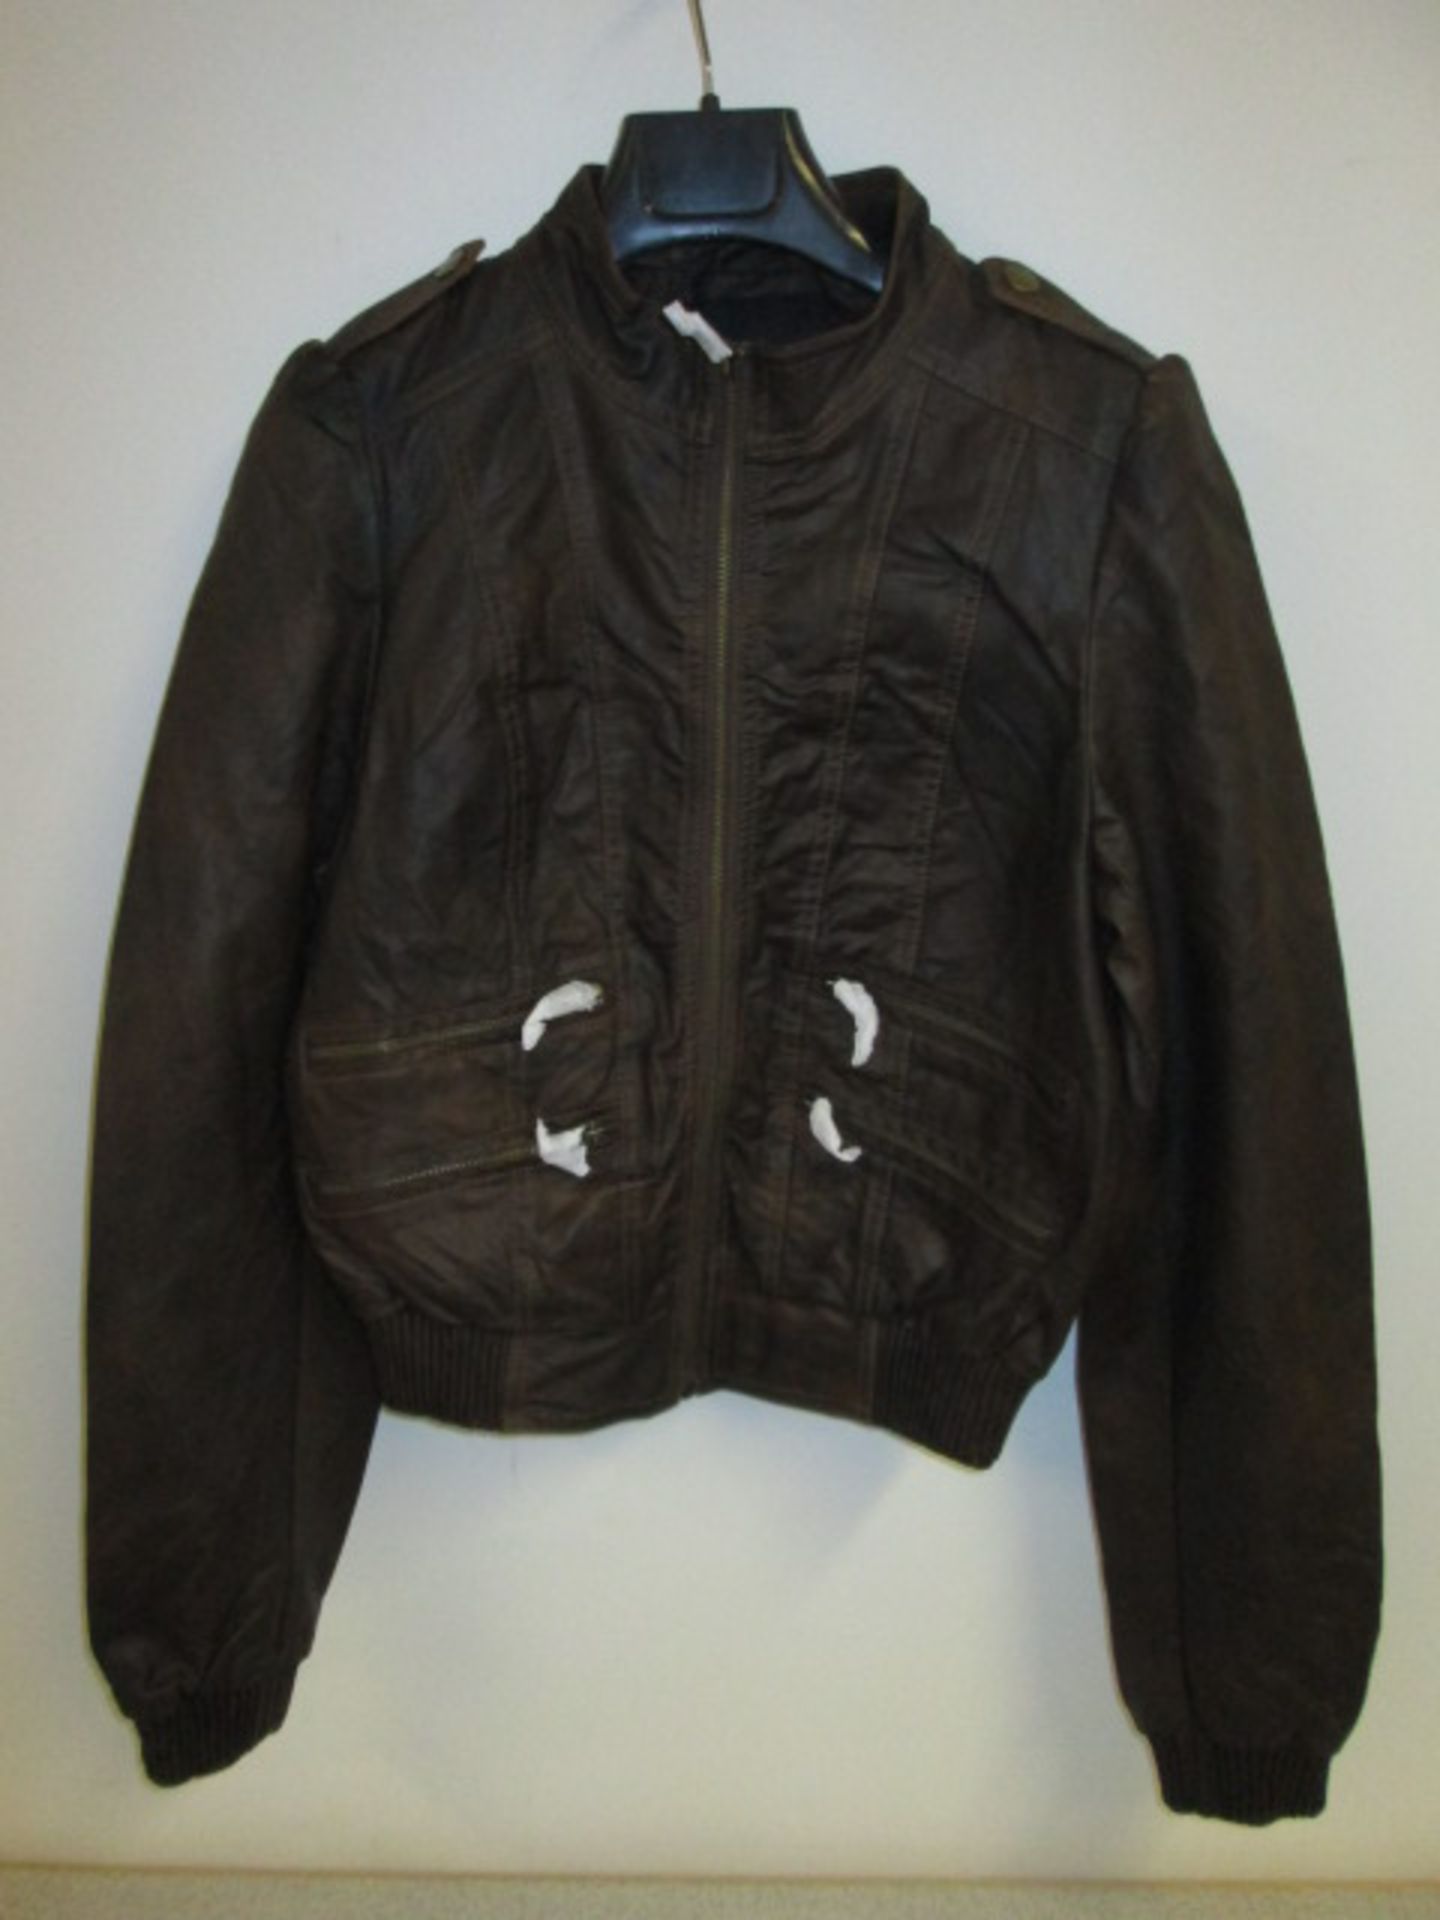 Lot to Include Approx 1200 Immitation Leather Ladies Jackets - Image 3 of 8